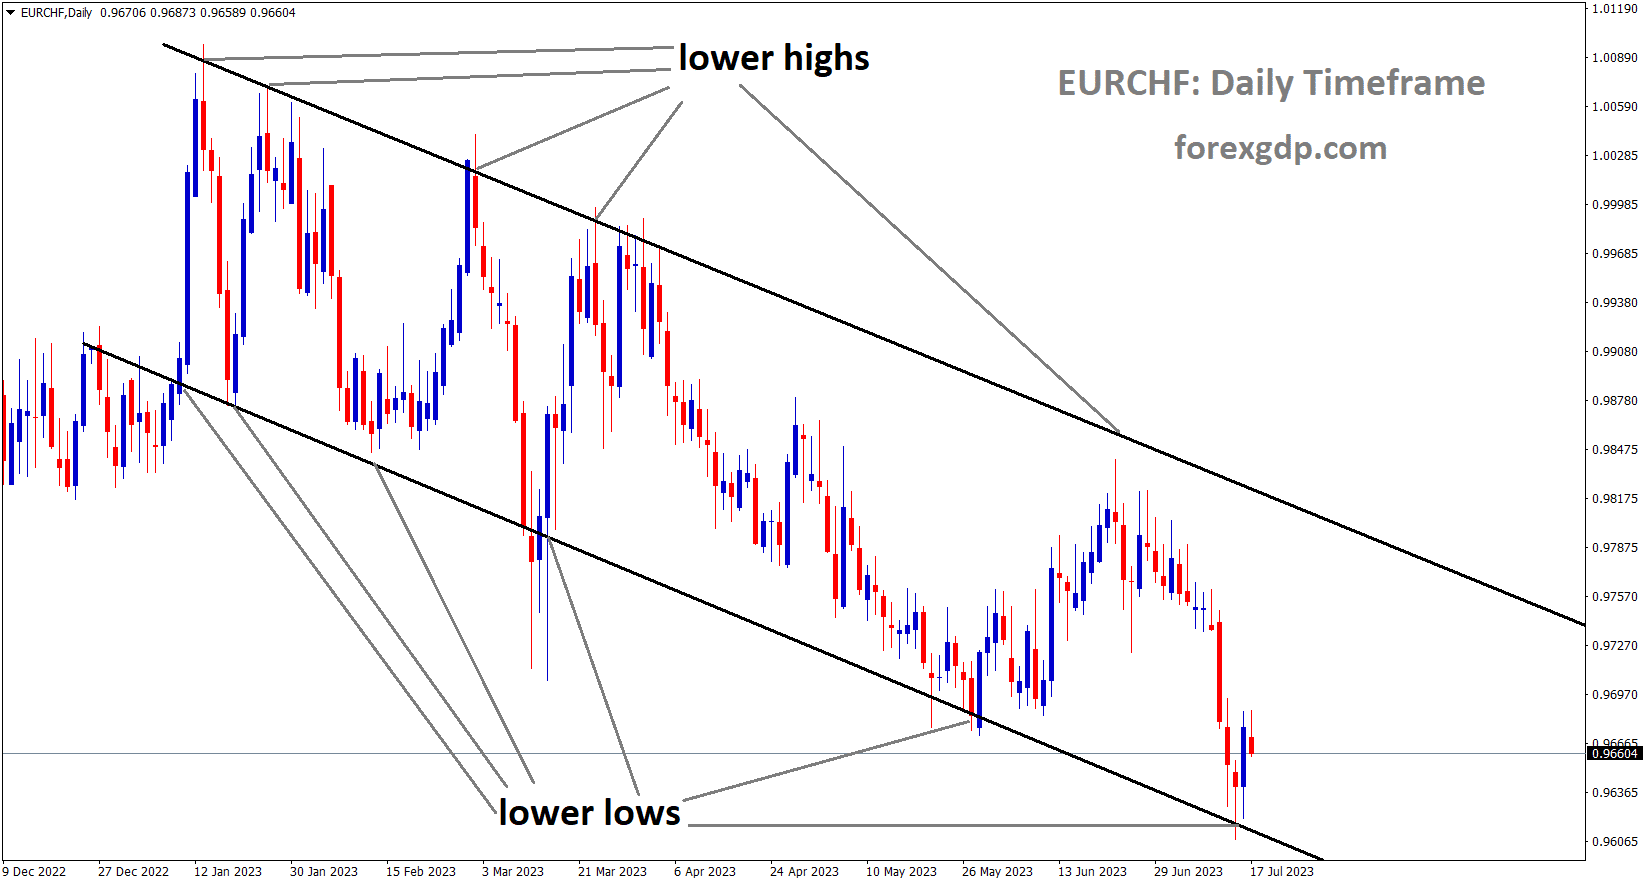 EURCHF is moving in the Descending channel and the market has reached the lower low area of the channel 1